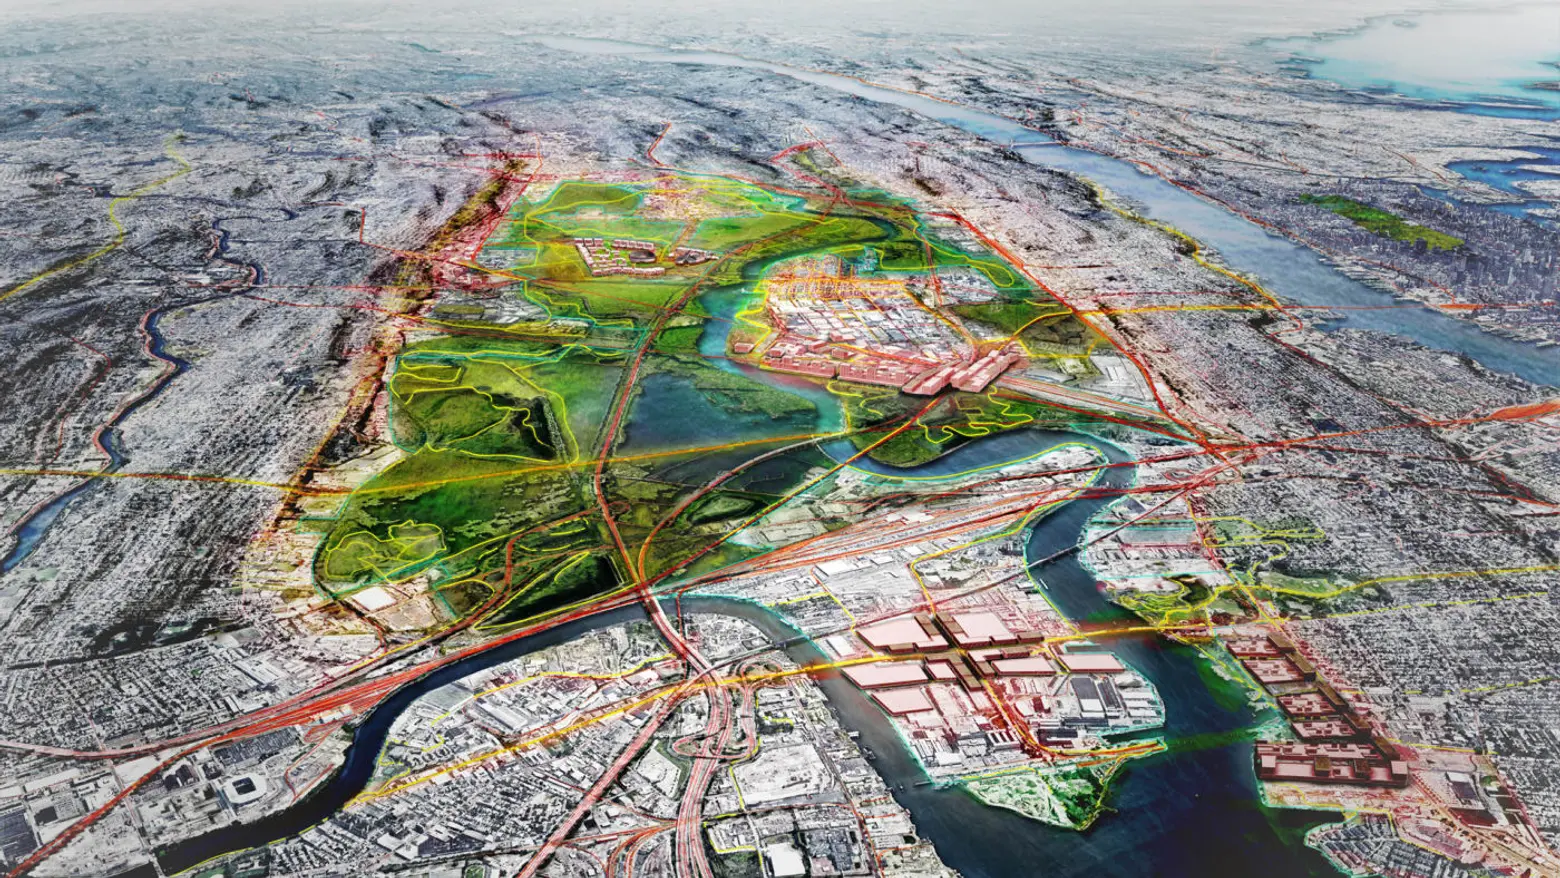 RPA report envisions New Jersey’s Meadowlands as the first ‘Climate Change National Park’